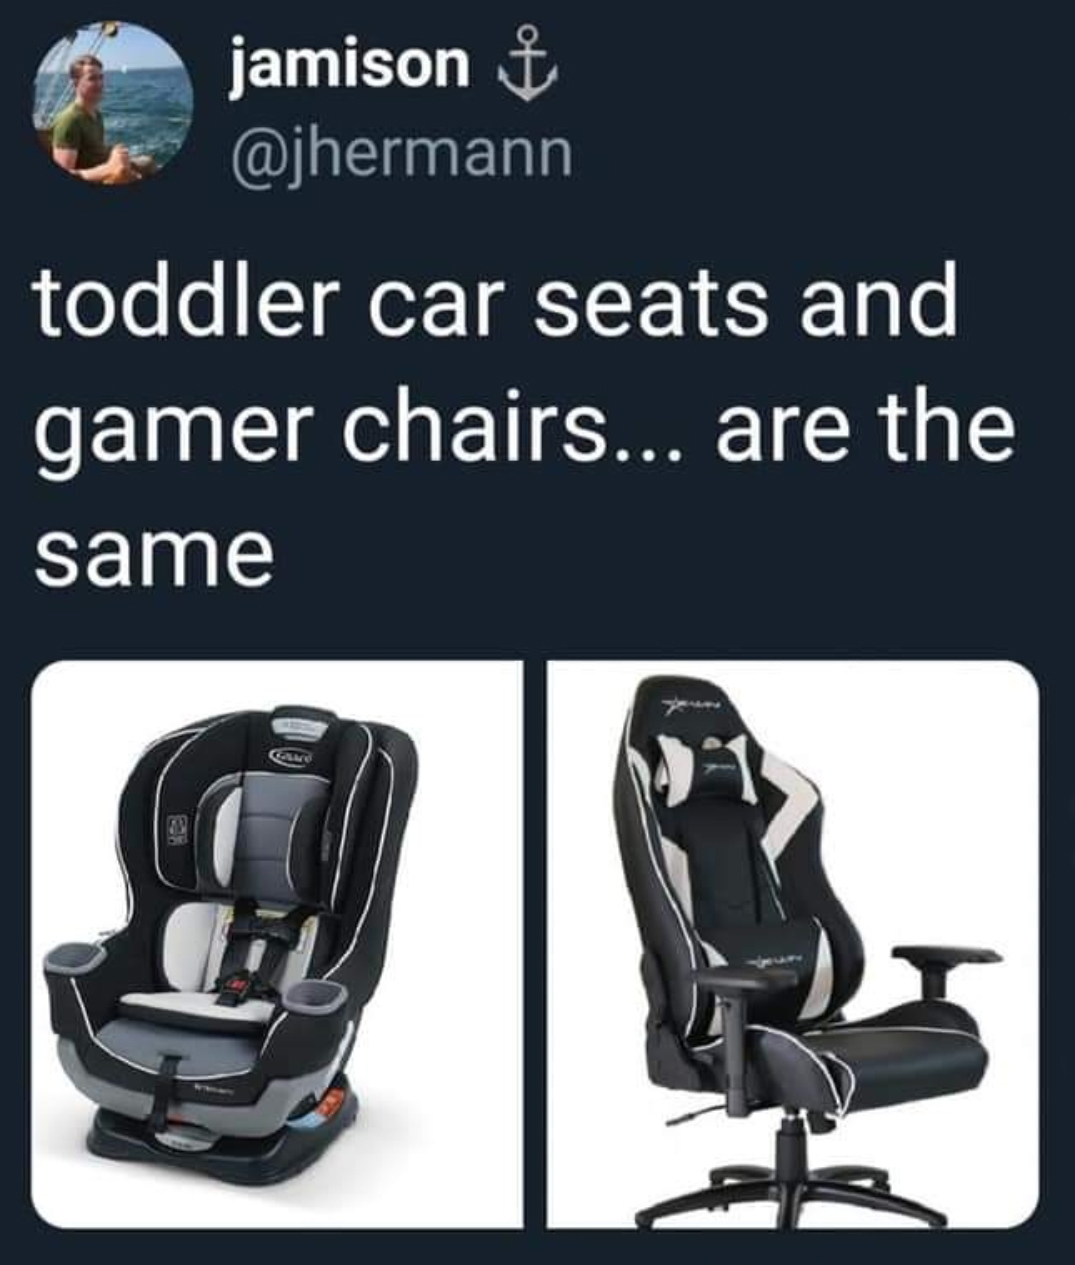 toddler car seats and gamer chairs - jamison $ toddler car seats and gamer chairs... are the same